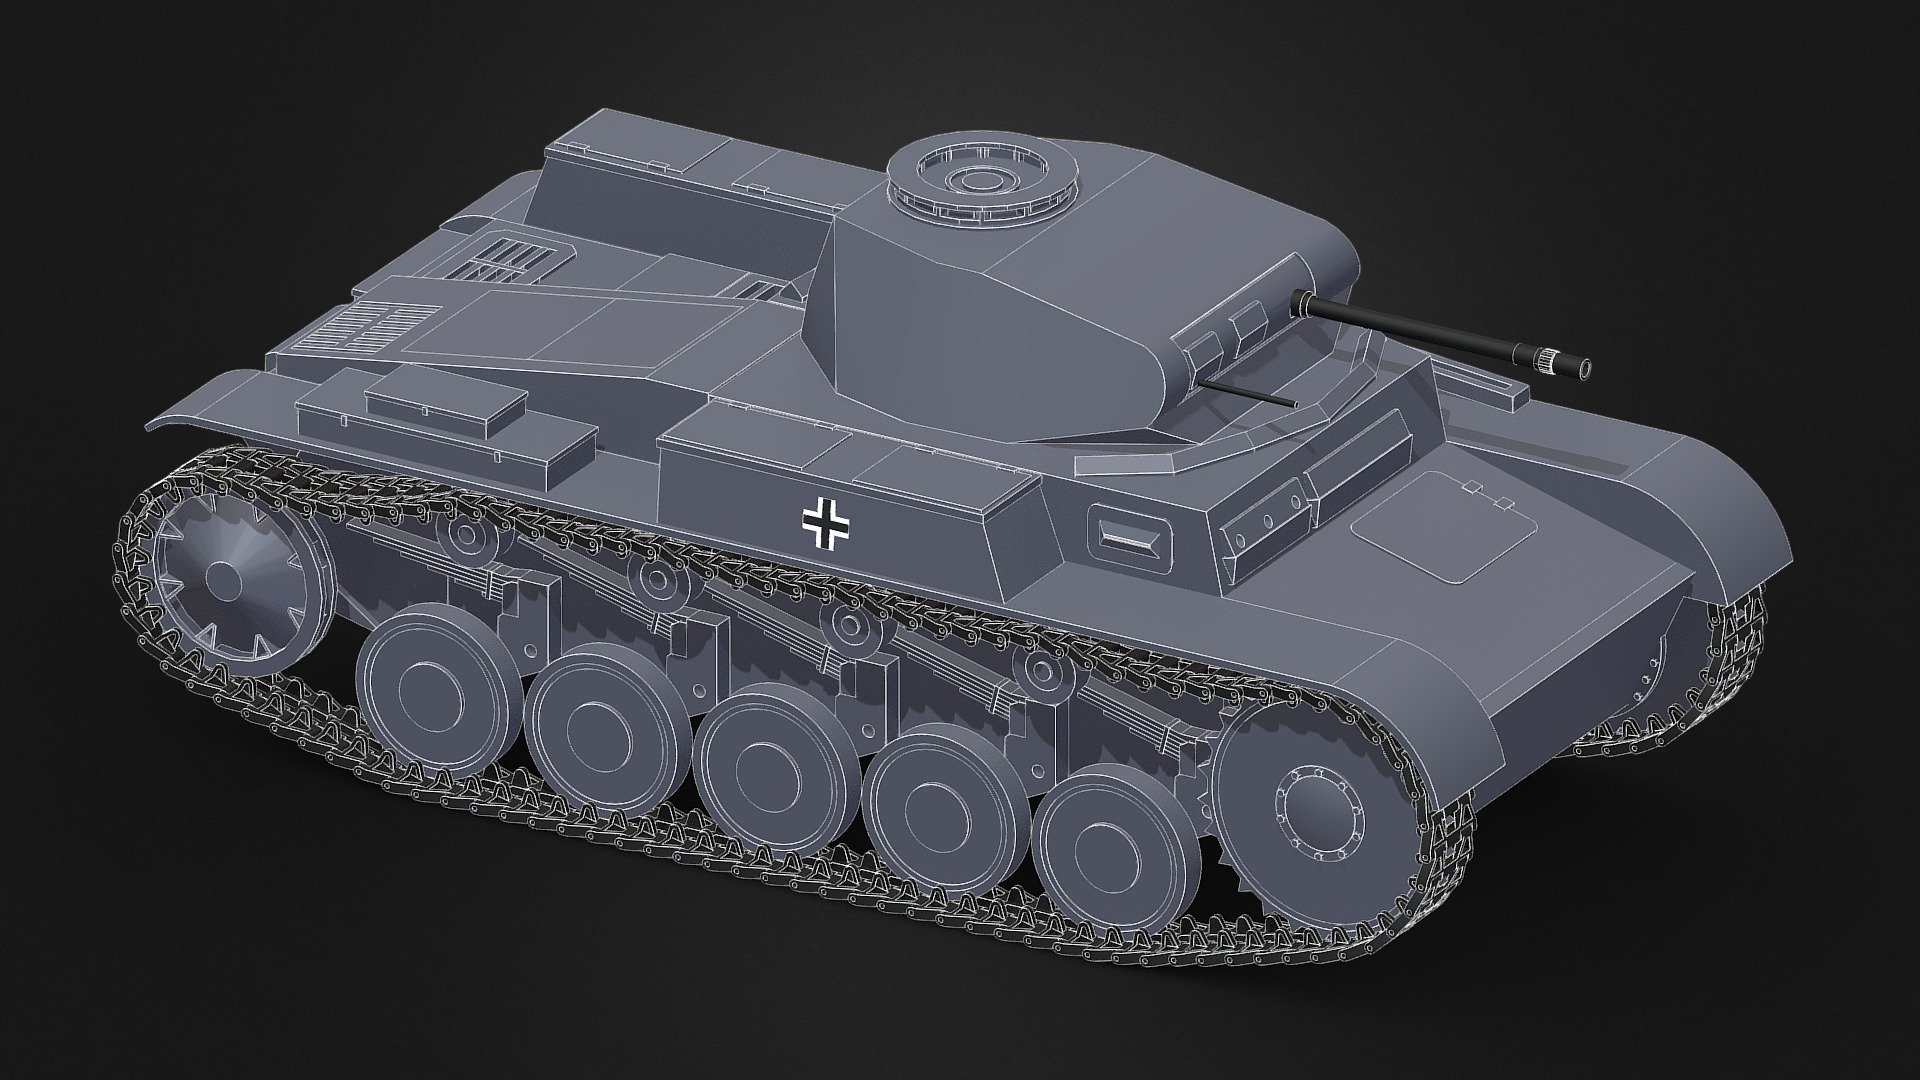 Nearly complete model, still requires some finishing touches.



The Panzer II is the common name used for a family of German tanks used in World War II. The official German designation was Panzerkampfwagen II (abbreviated PzKpfw II).

Although the vehicle had originally been designed as a stopgap while larger, more advanced tanks were developed, it nonetheless went on to play an important role in the early years of World War II, during the Polish and French campaigns. The Panzer II was the most numerous tank in the German Panzer divisions at the beginning of the war. It was used both in North Africa against the Western Allies and on the Eastern Front against the Soviet Union 3d model